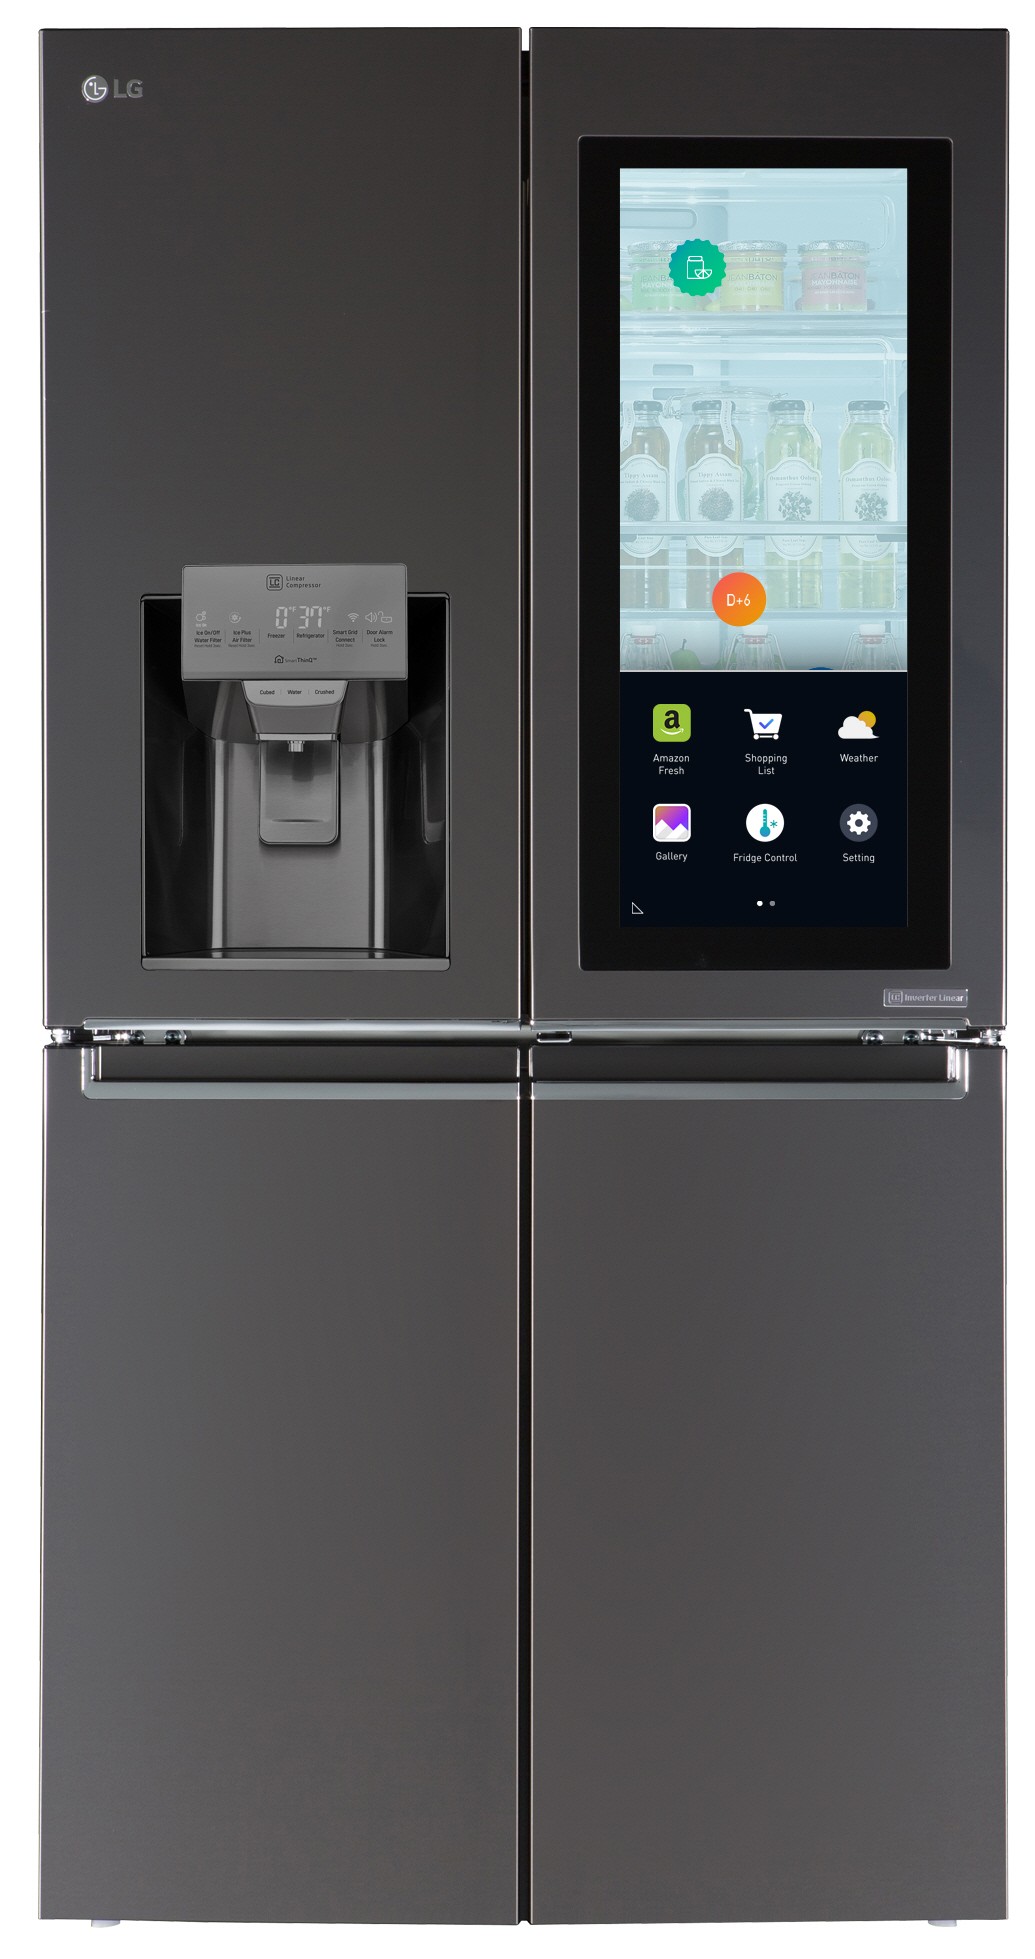 LG Smart InstaView Refrigerator Features Voice Control, webOS and